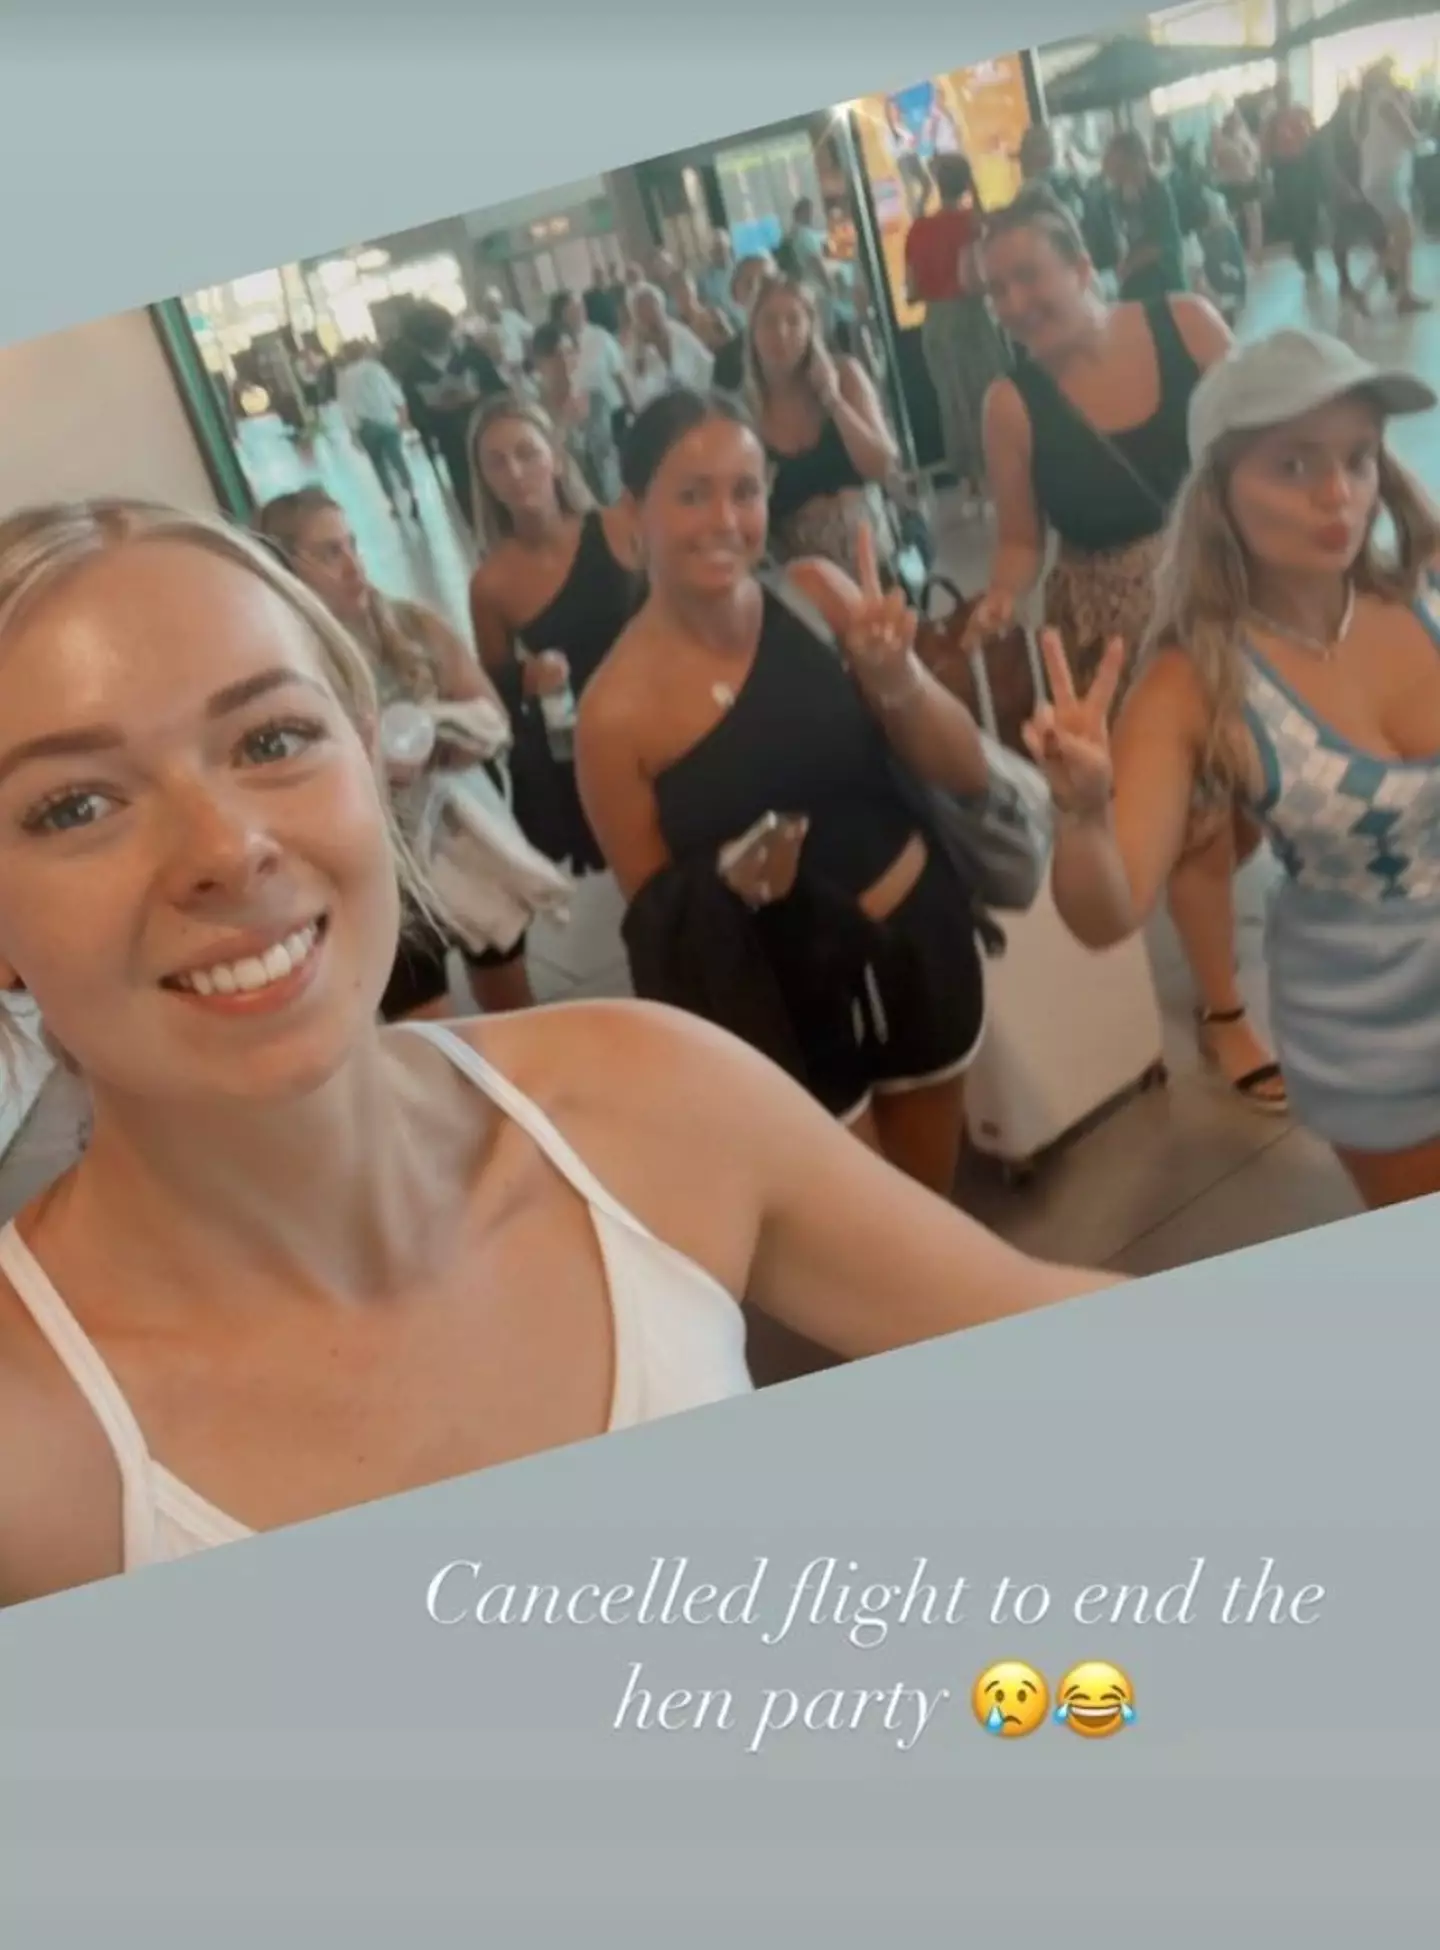 Leah Washington's flight home from her hen do was cancelled.